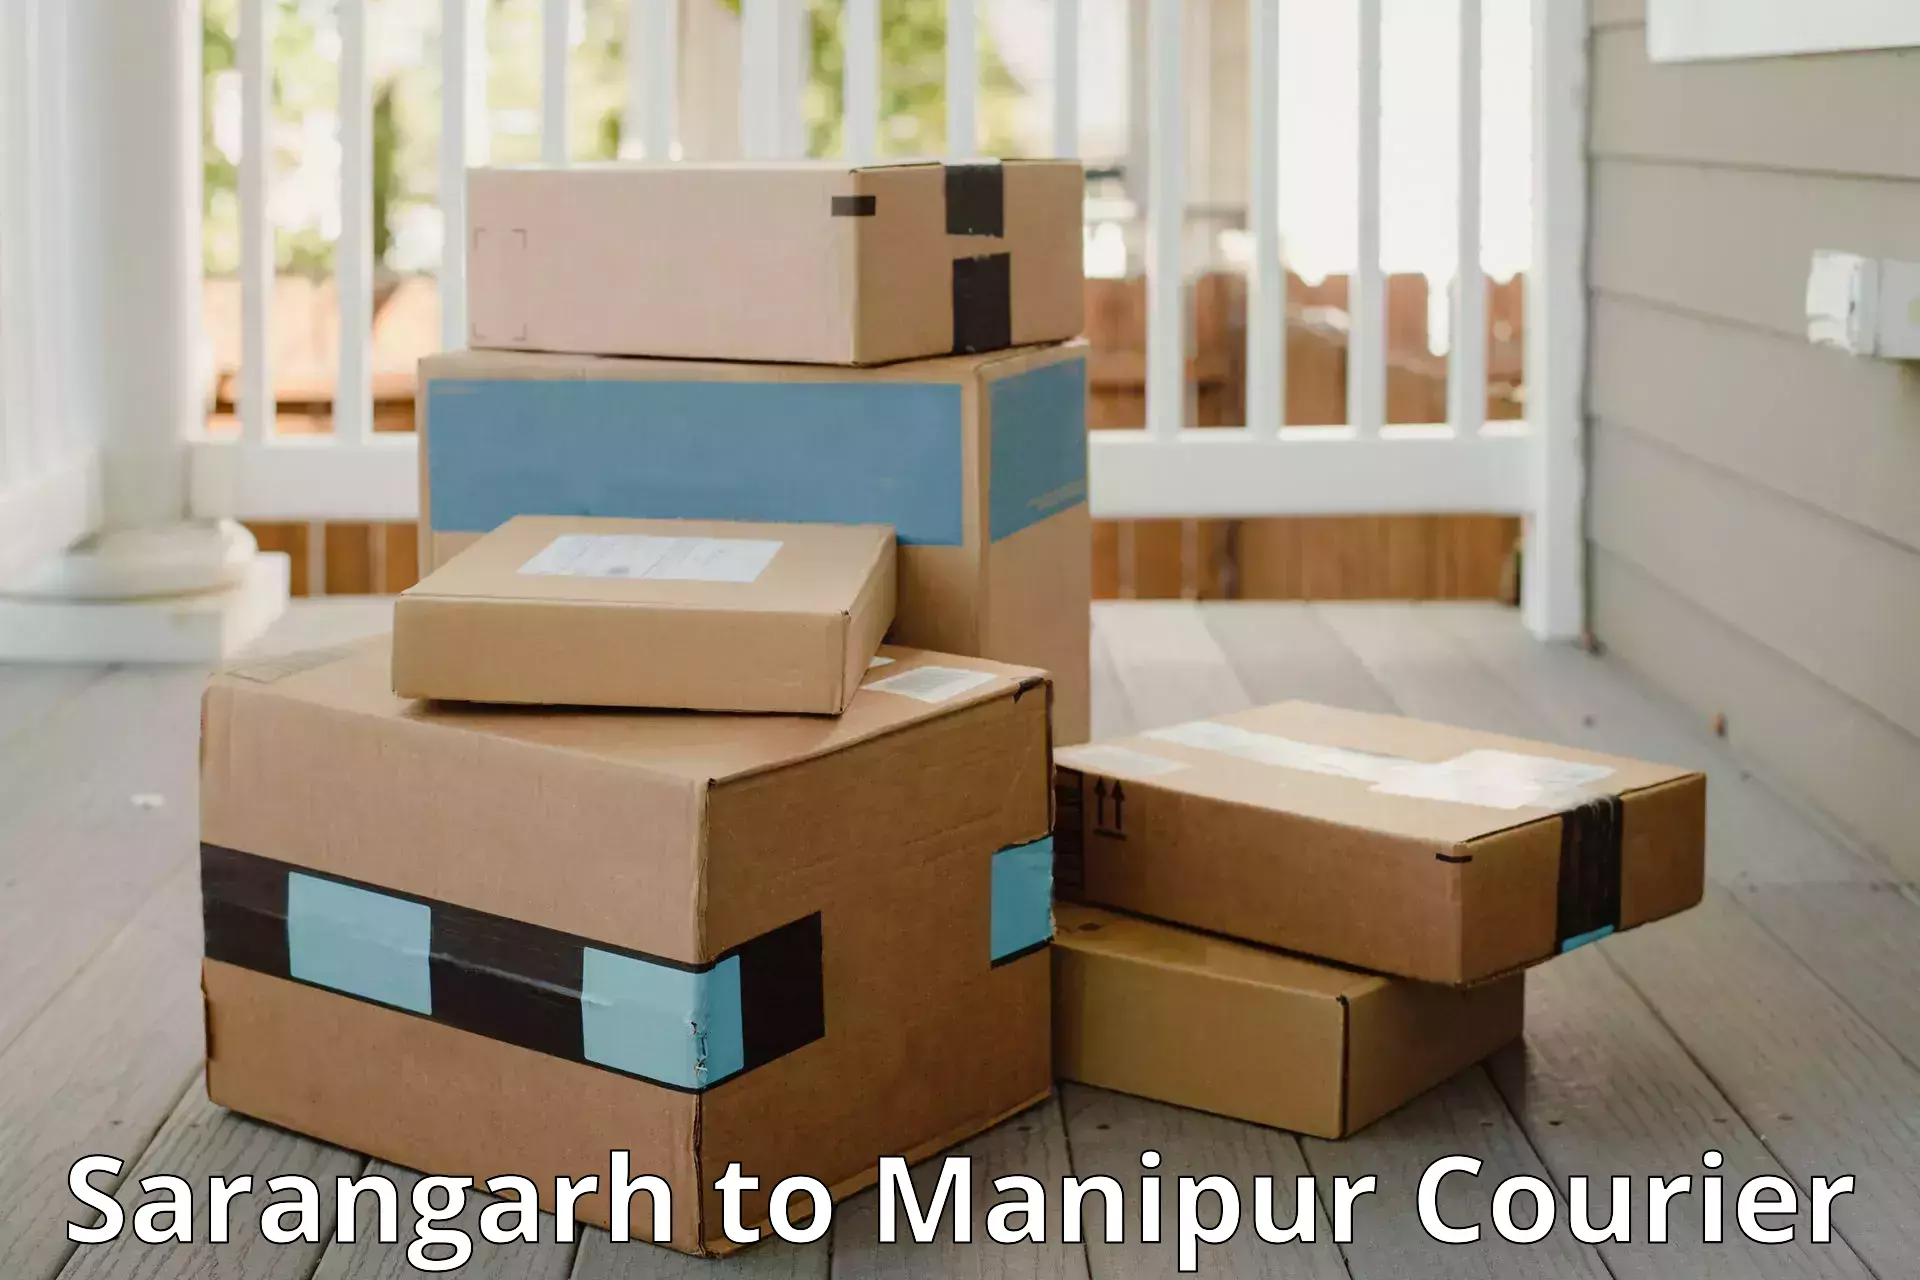 Luggage storage and delivery in Sarangarh to Imphal